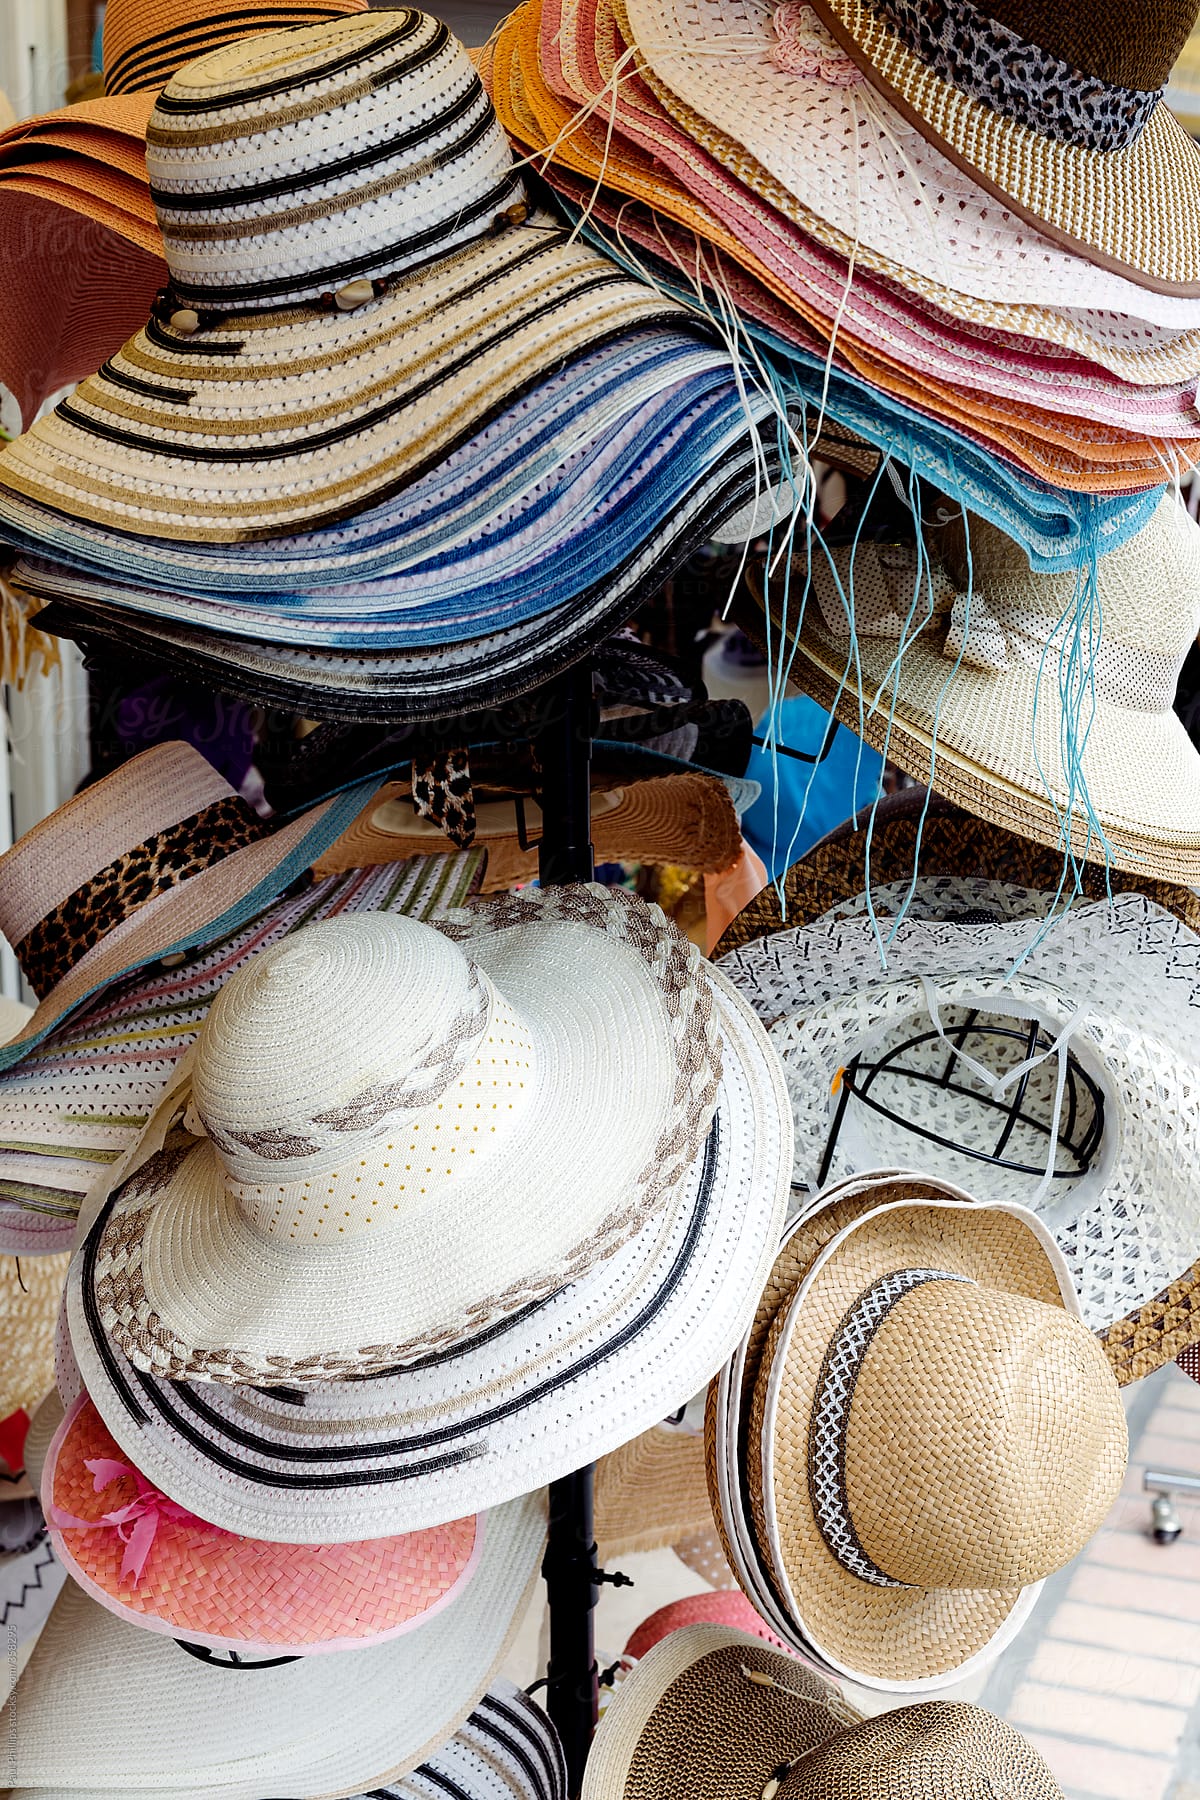 Display of summer hats in a tourist shop